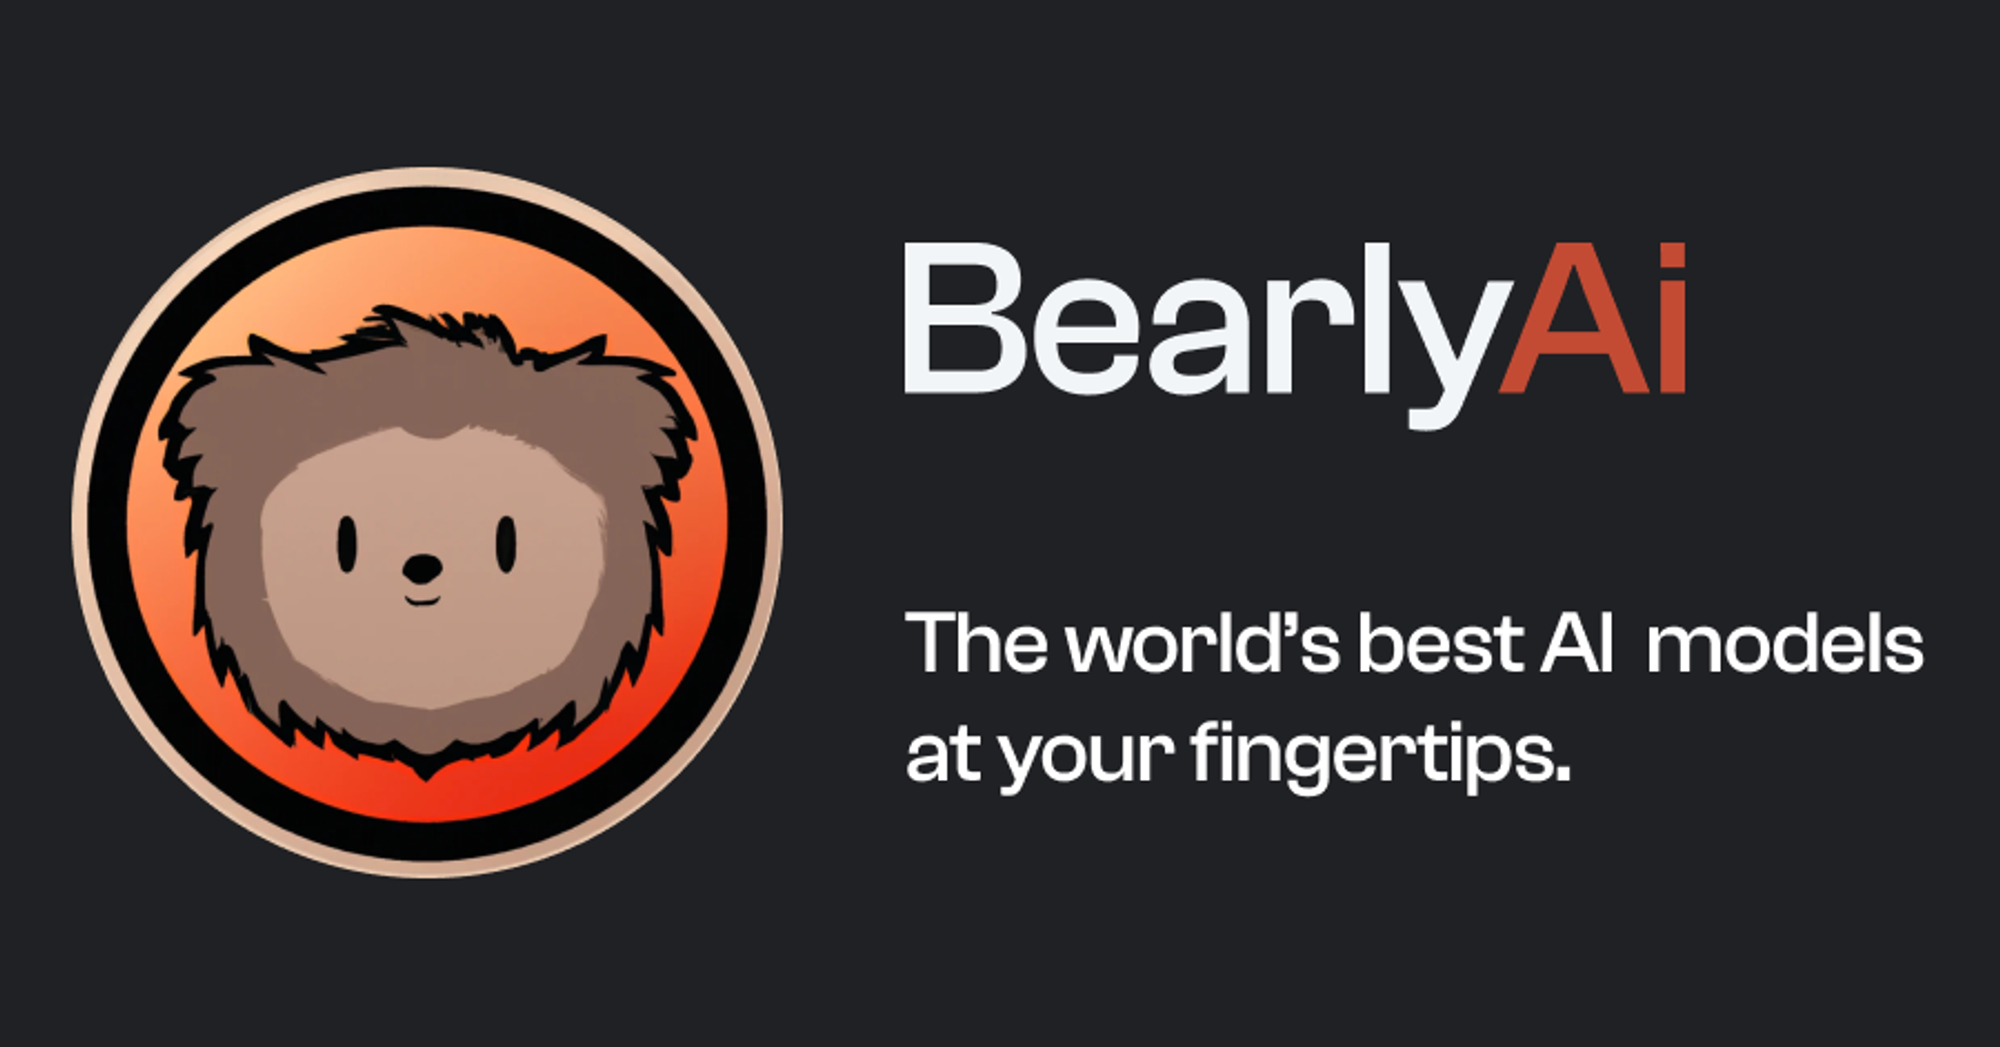 Bearly.ai | The world's best Ai at your fingertips.